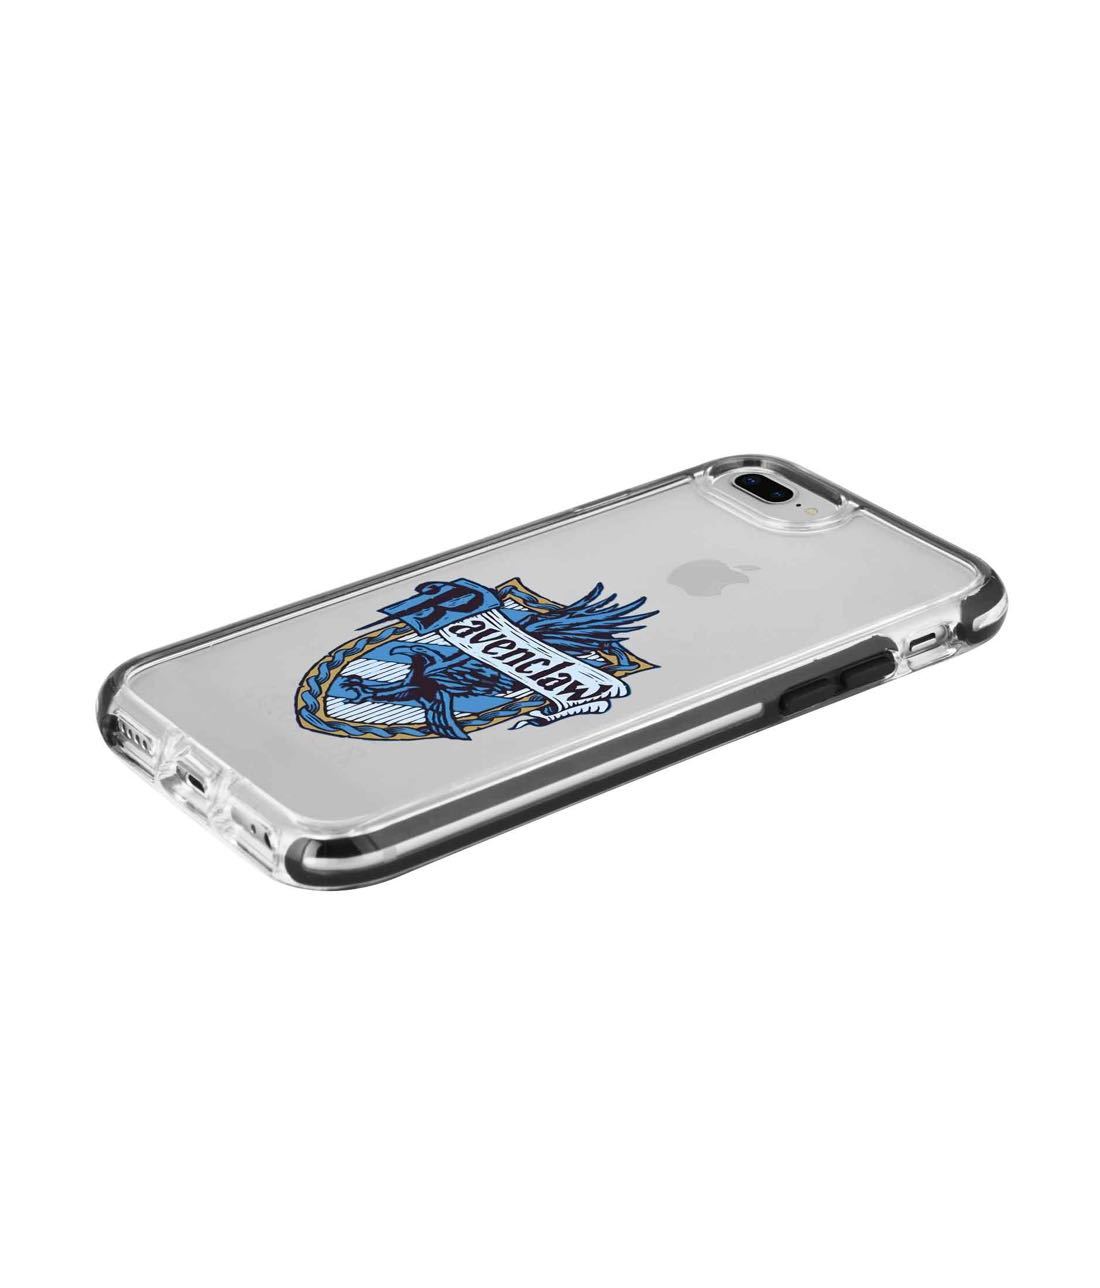 Crest Ravenclaw - Extreme Phone Case for iPhone 8 Plus